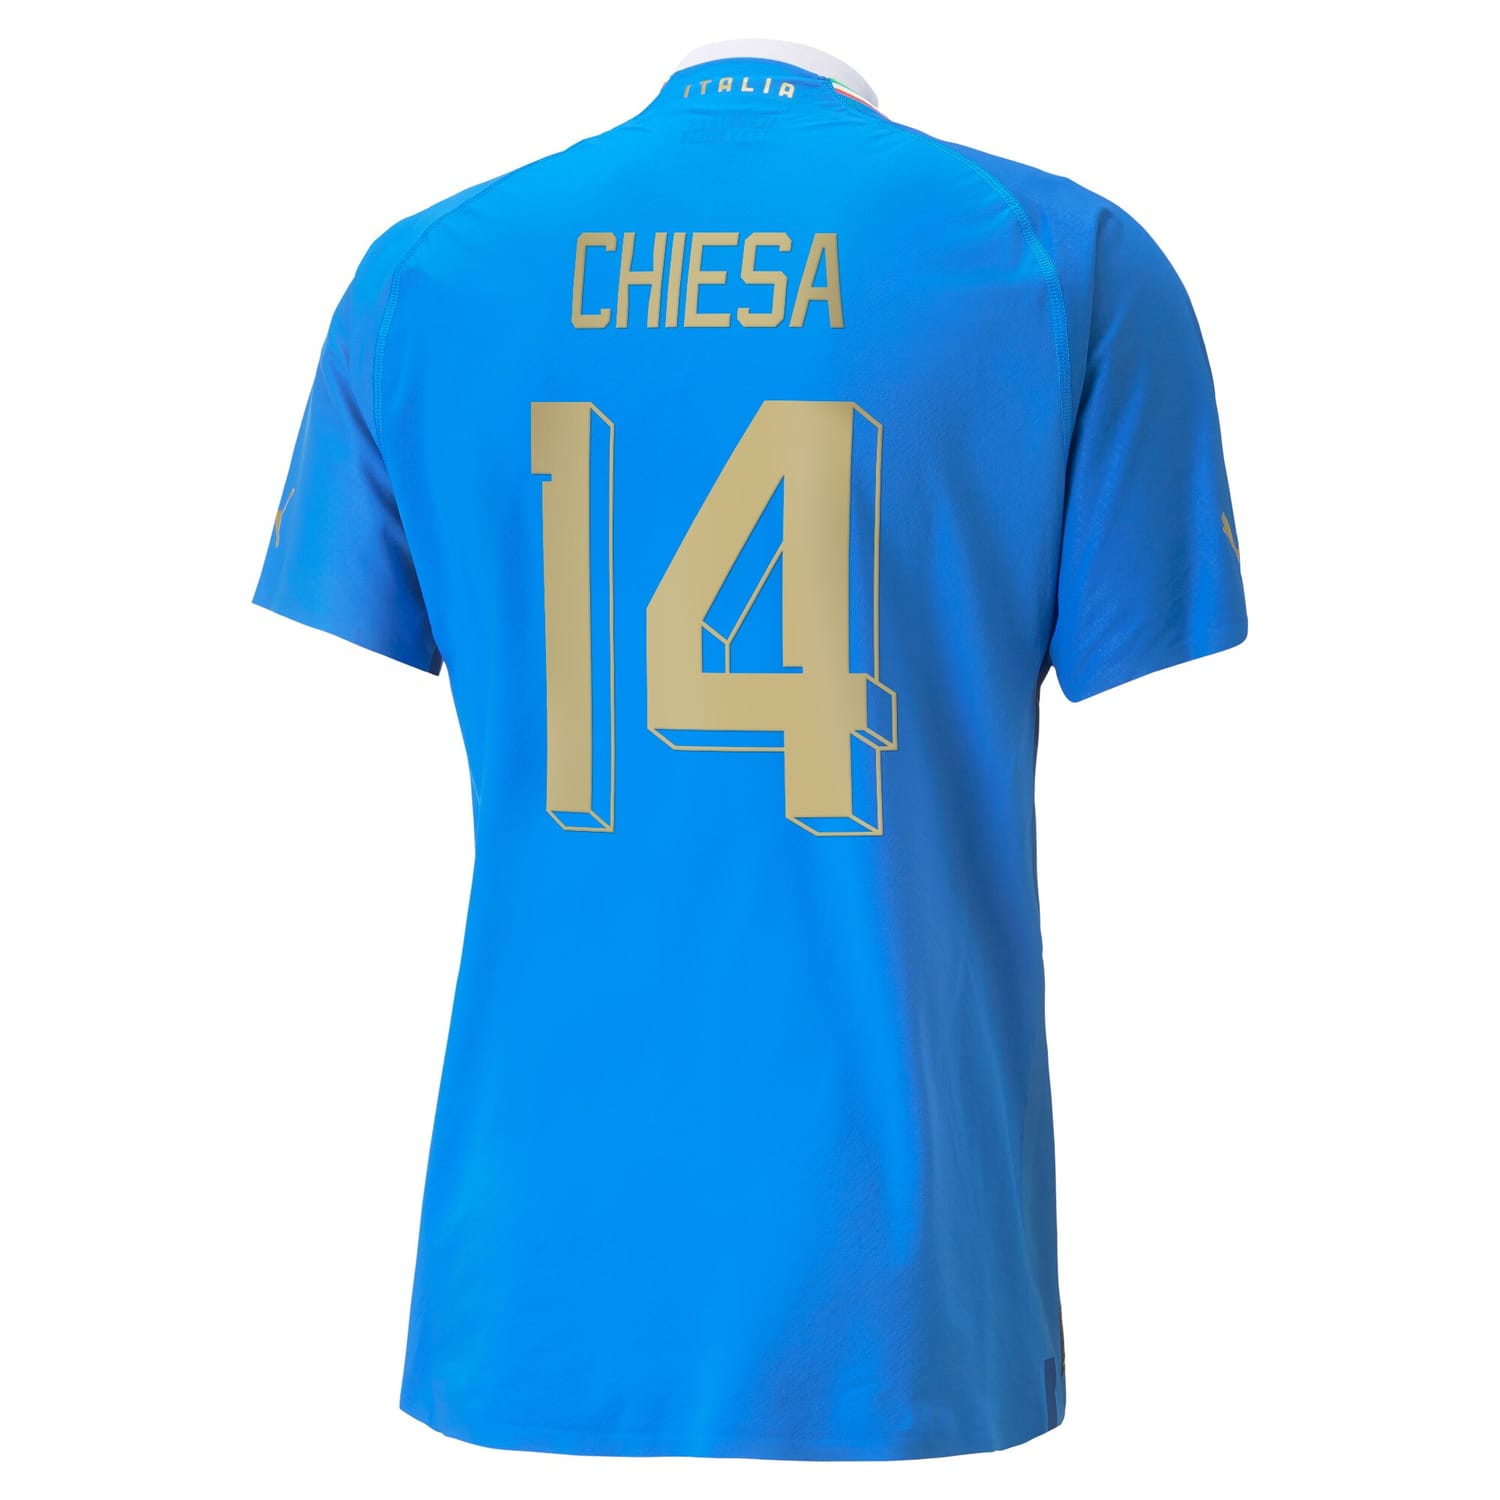 Italy National Team Home Authentic Jersey Shirt player Federico Chiesa 14 printing for Men